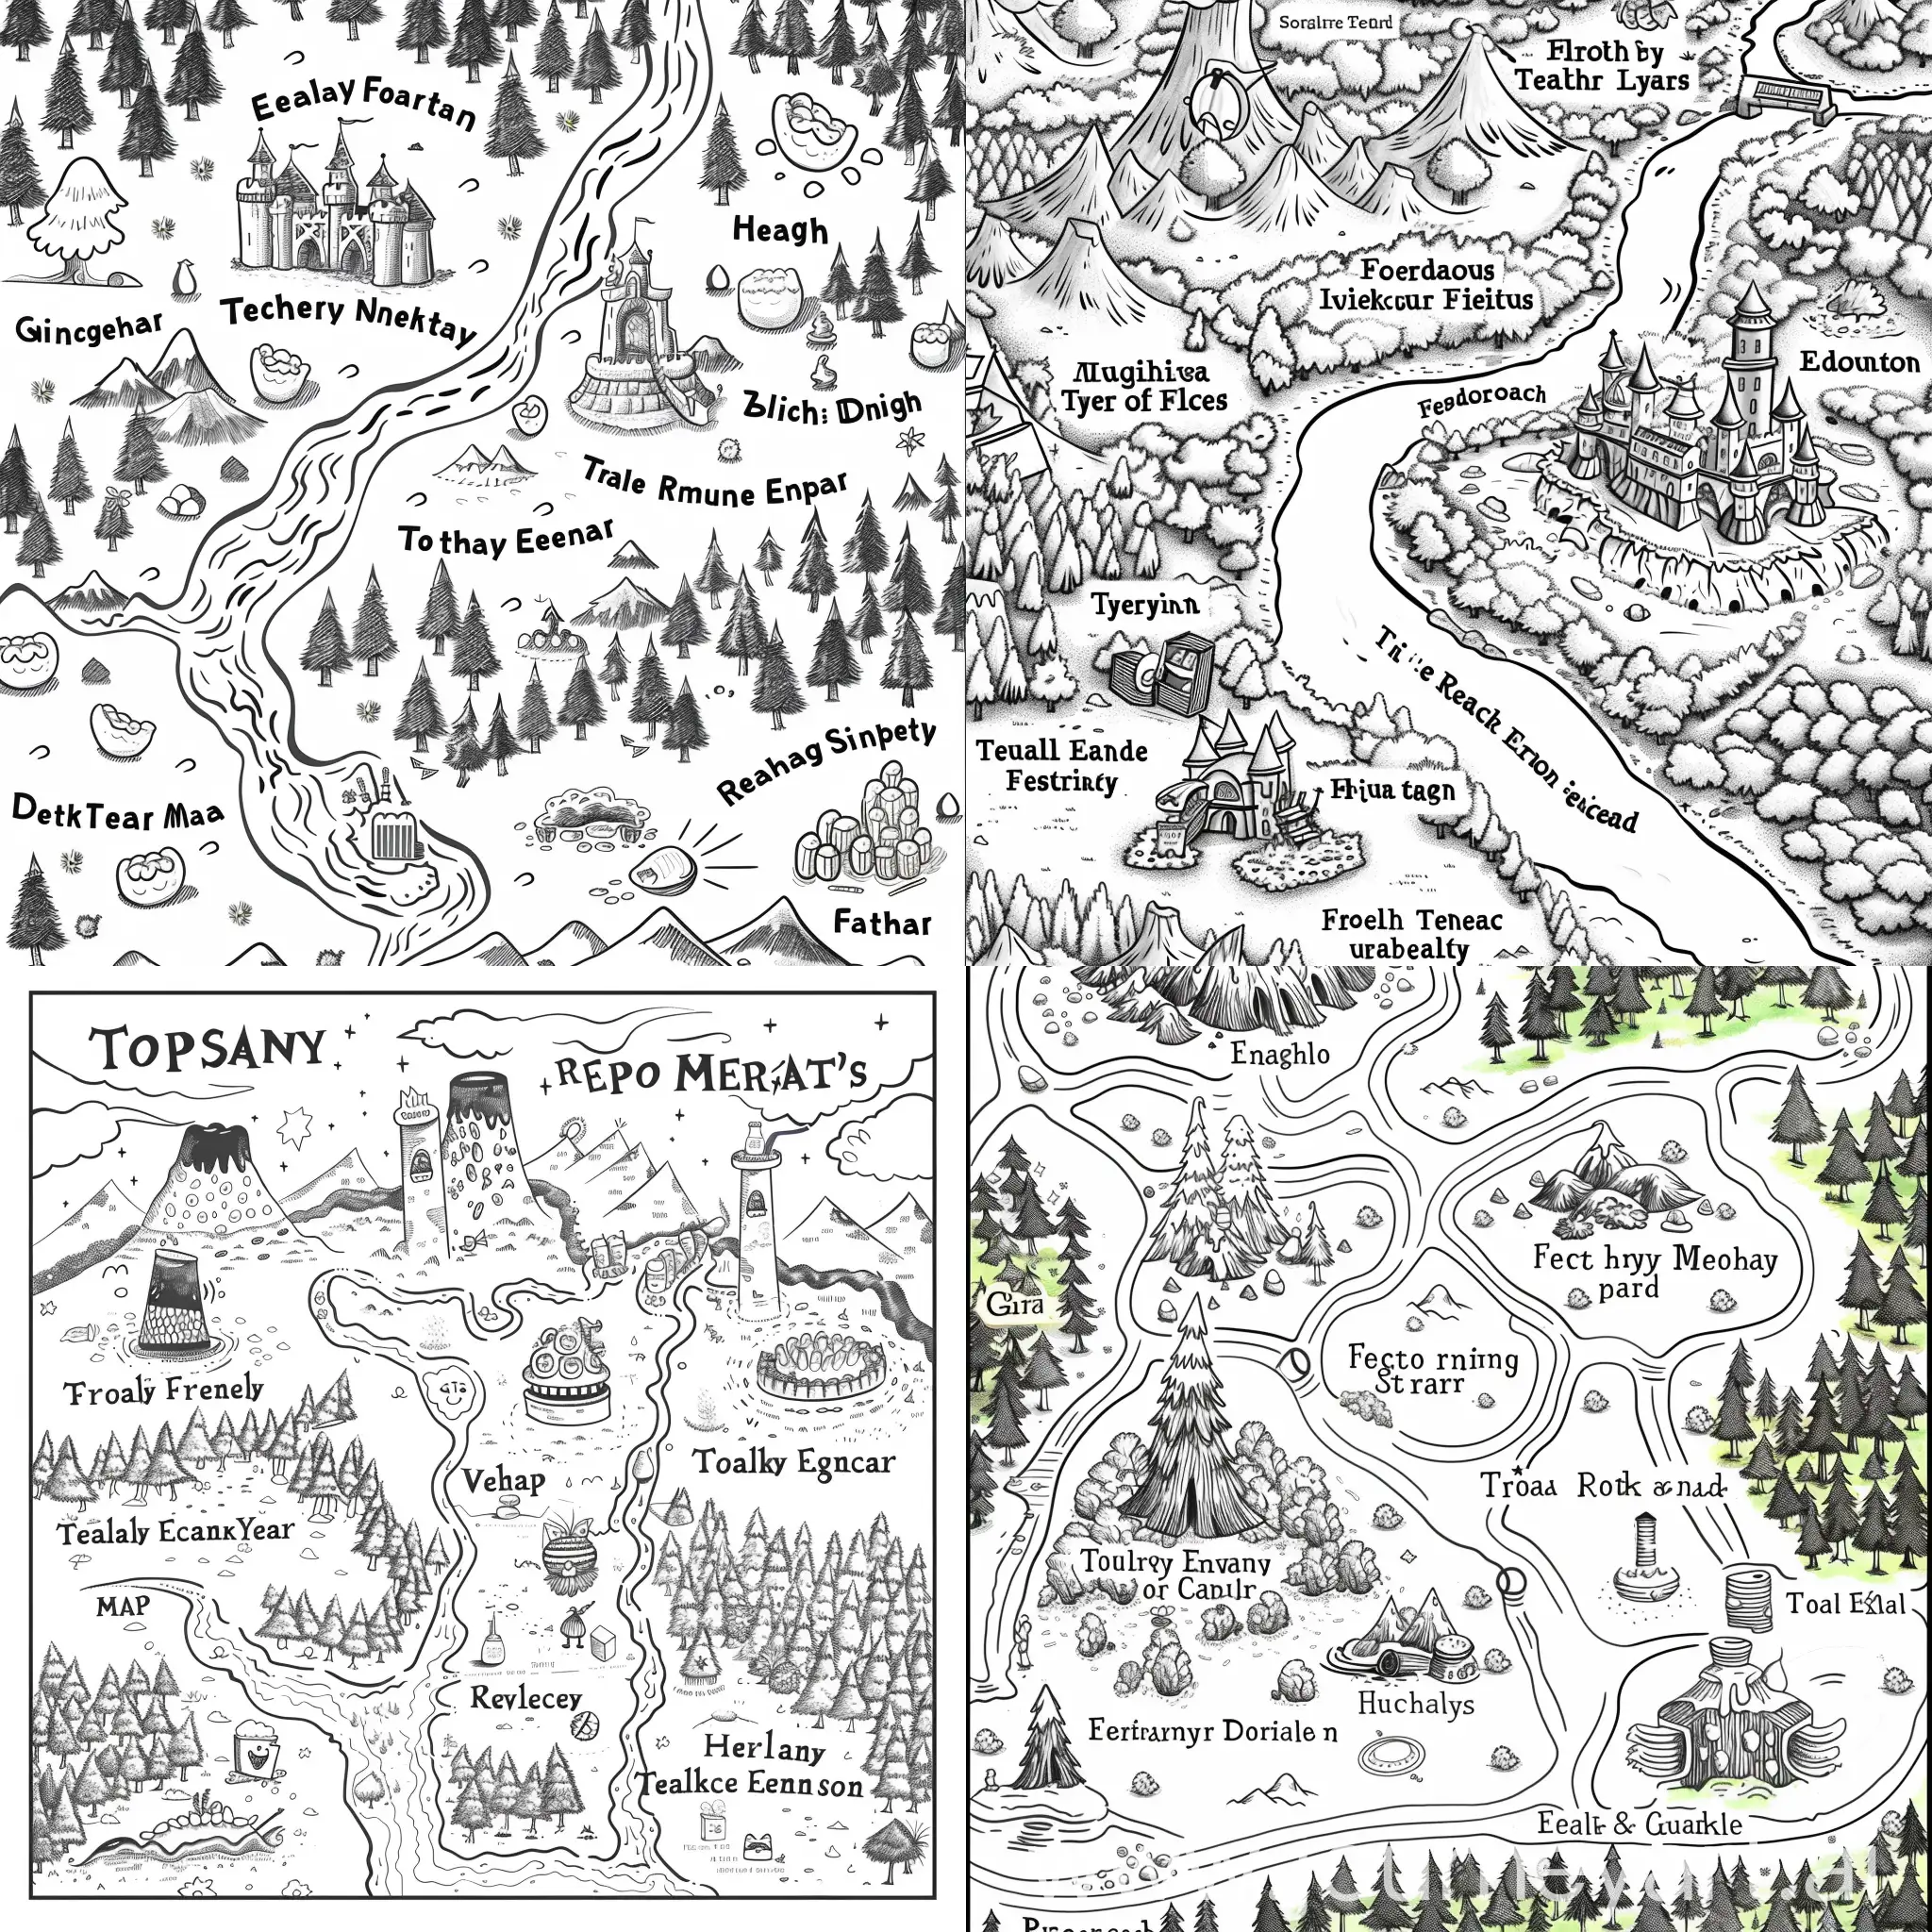  1. "Generate a black and white enchanting kingdom map suitable for kids to explore and color." 2. "Include prominent features like 'Floss Forest,' 'Toothpaste River,' and 'Healthy Eating Highlands.'" 3. "Ensure the map has whimsical illustrations suitable for coloring." 4. "Label each element clearly to prevent confusion."